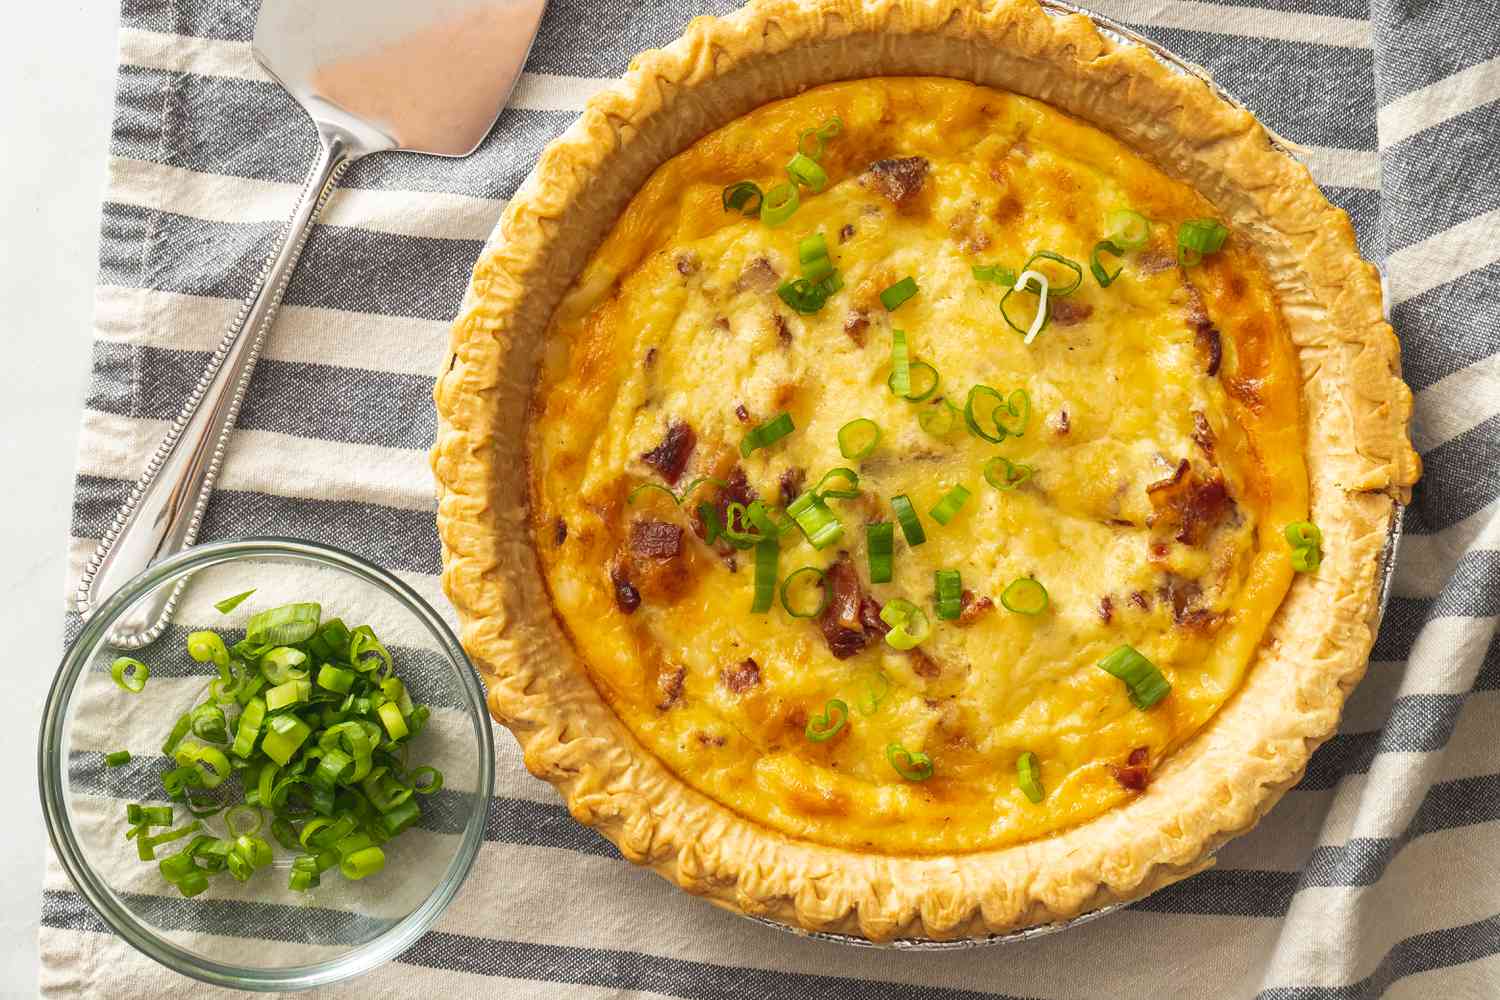 12-facts-about-national-quiche-lorraine-day-may-20th